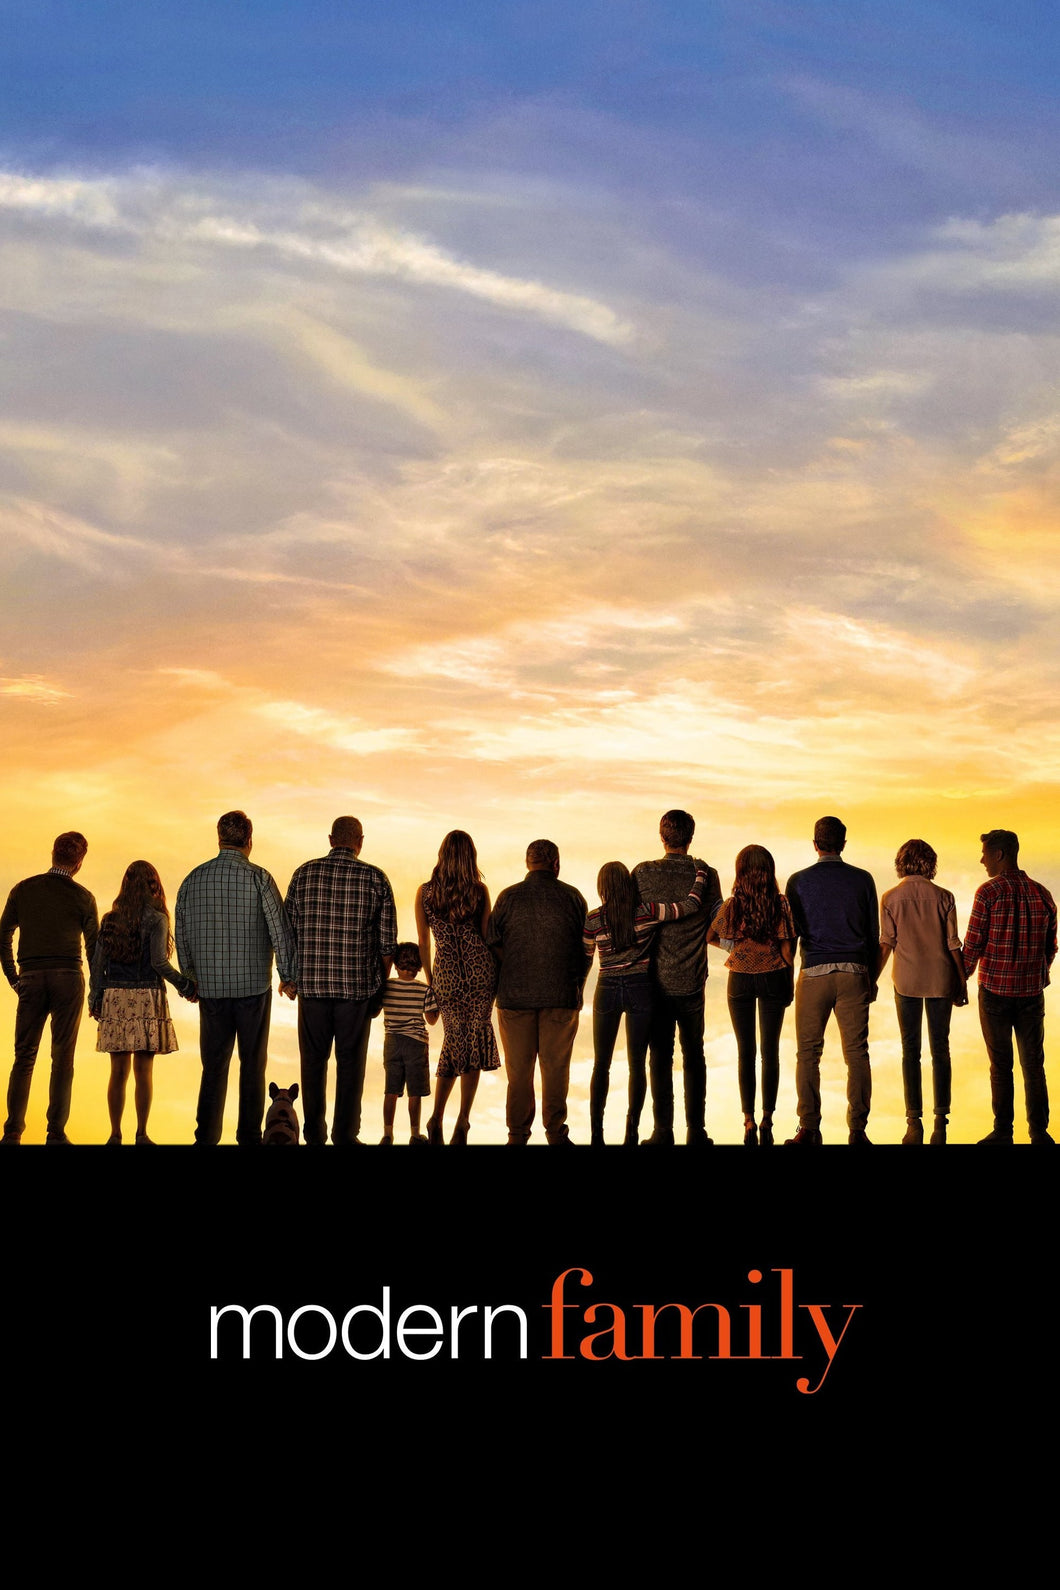 Modern Family TV Series High Quality Glossy Paper A1 A2 A3 A4 A3 Framed or Unframed!!!